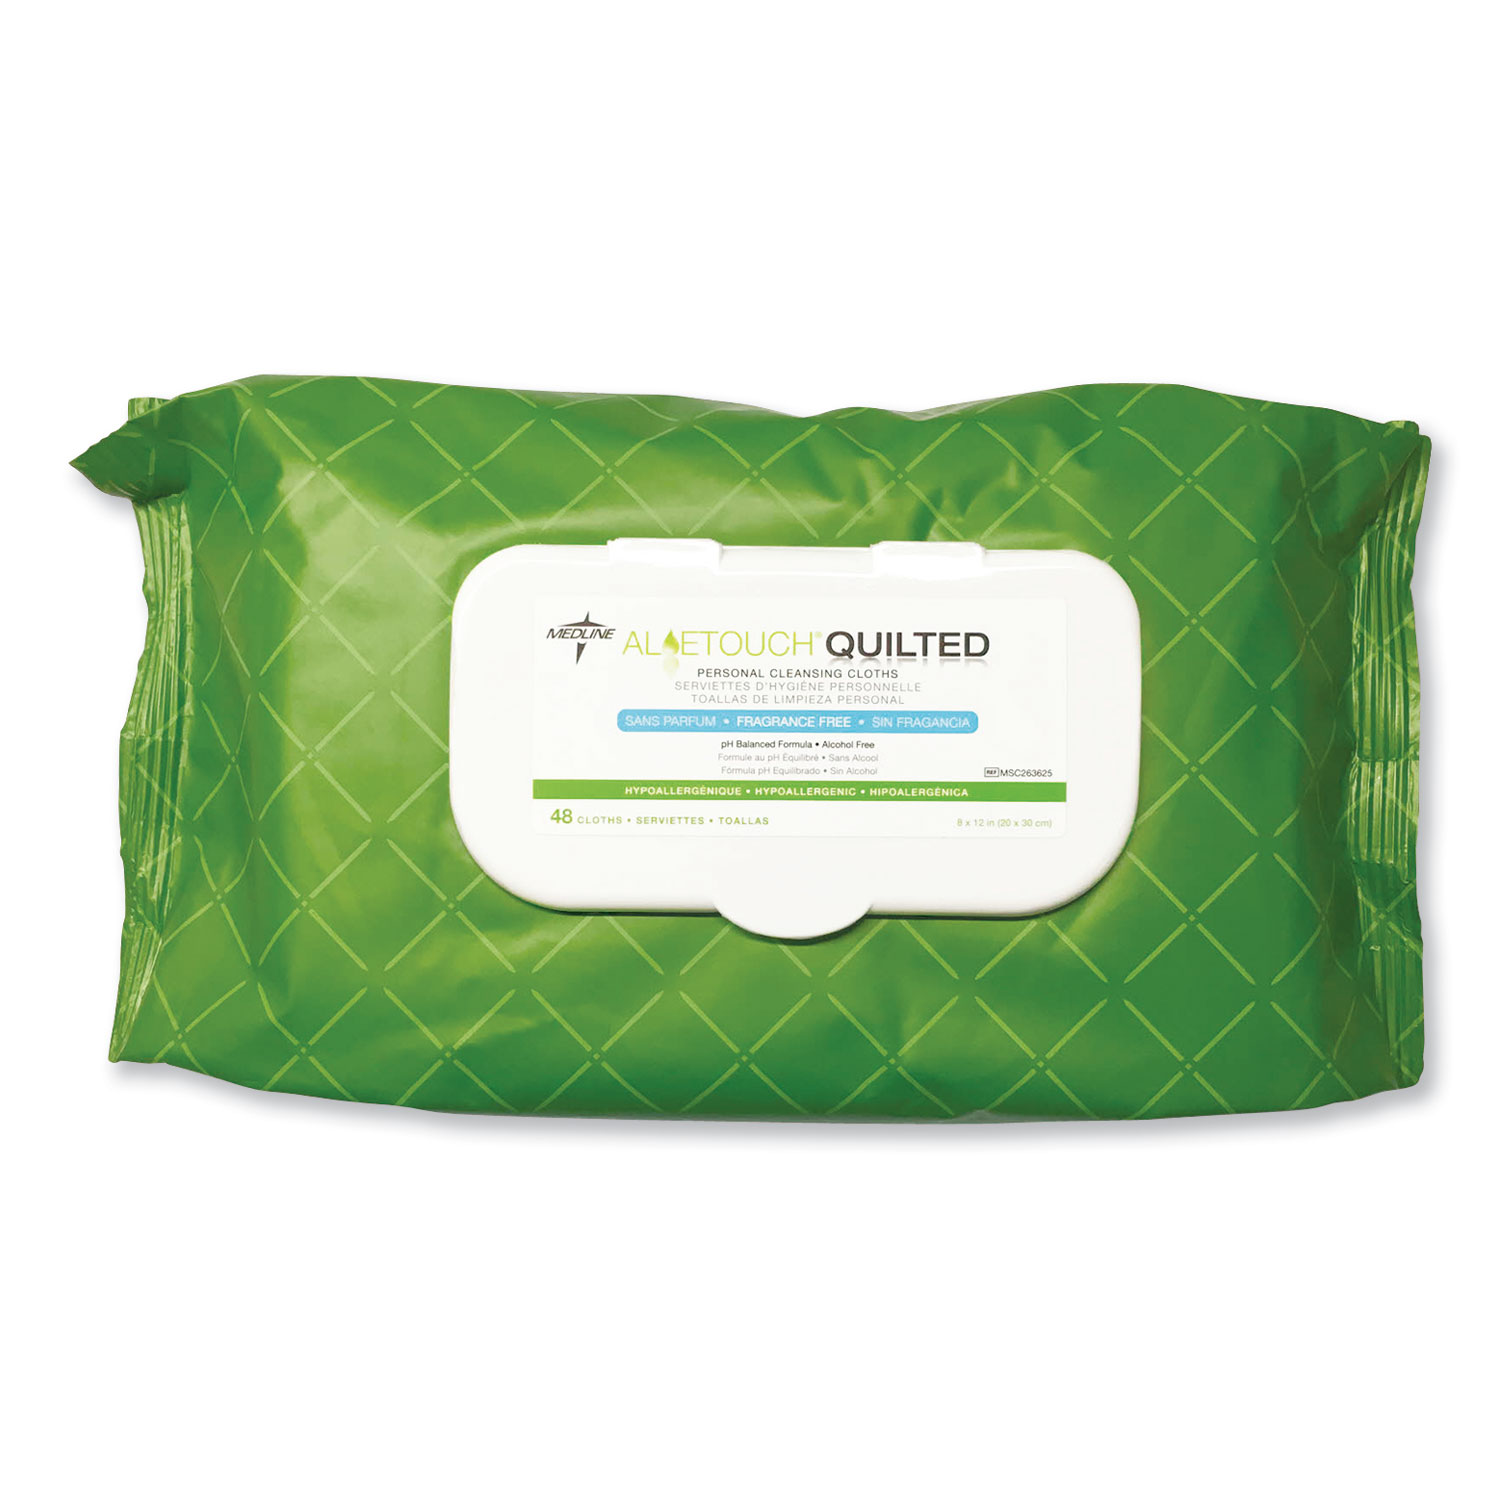  Medline MSC263625 FitRight Select Premium Personal Cleansing Wipes, 8 x 12, 48/Pack (MIIMSC263625) 